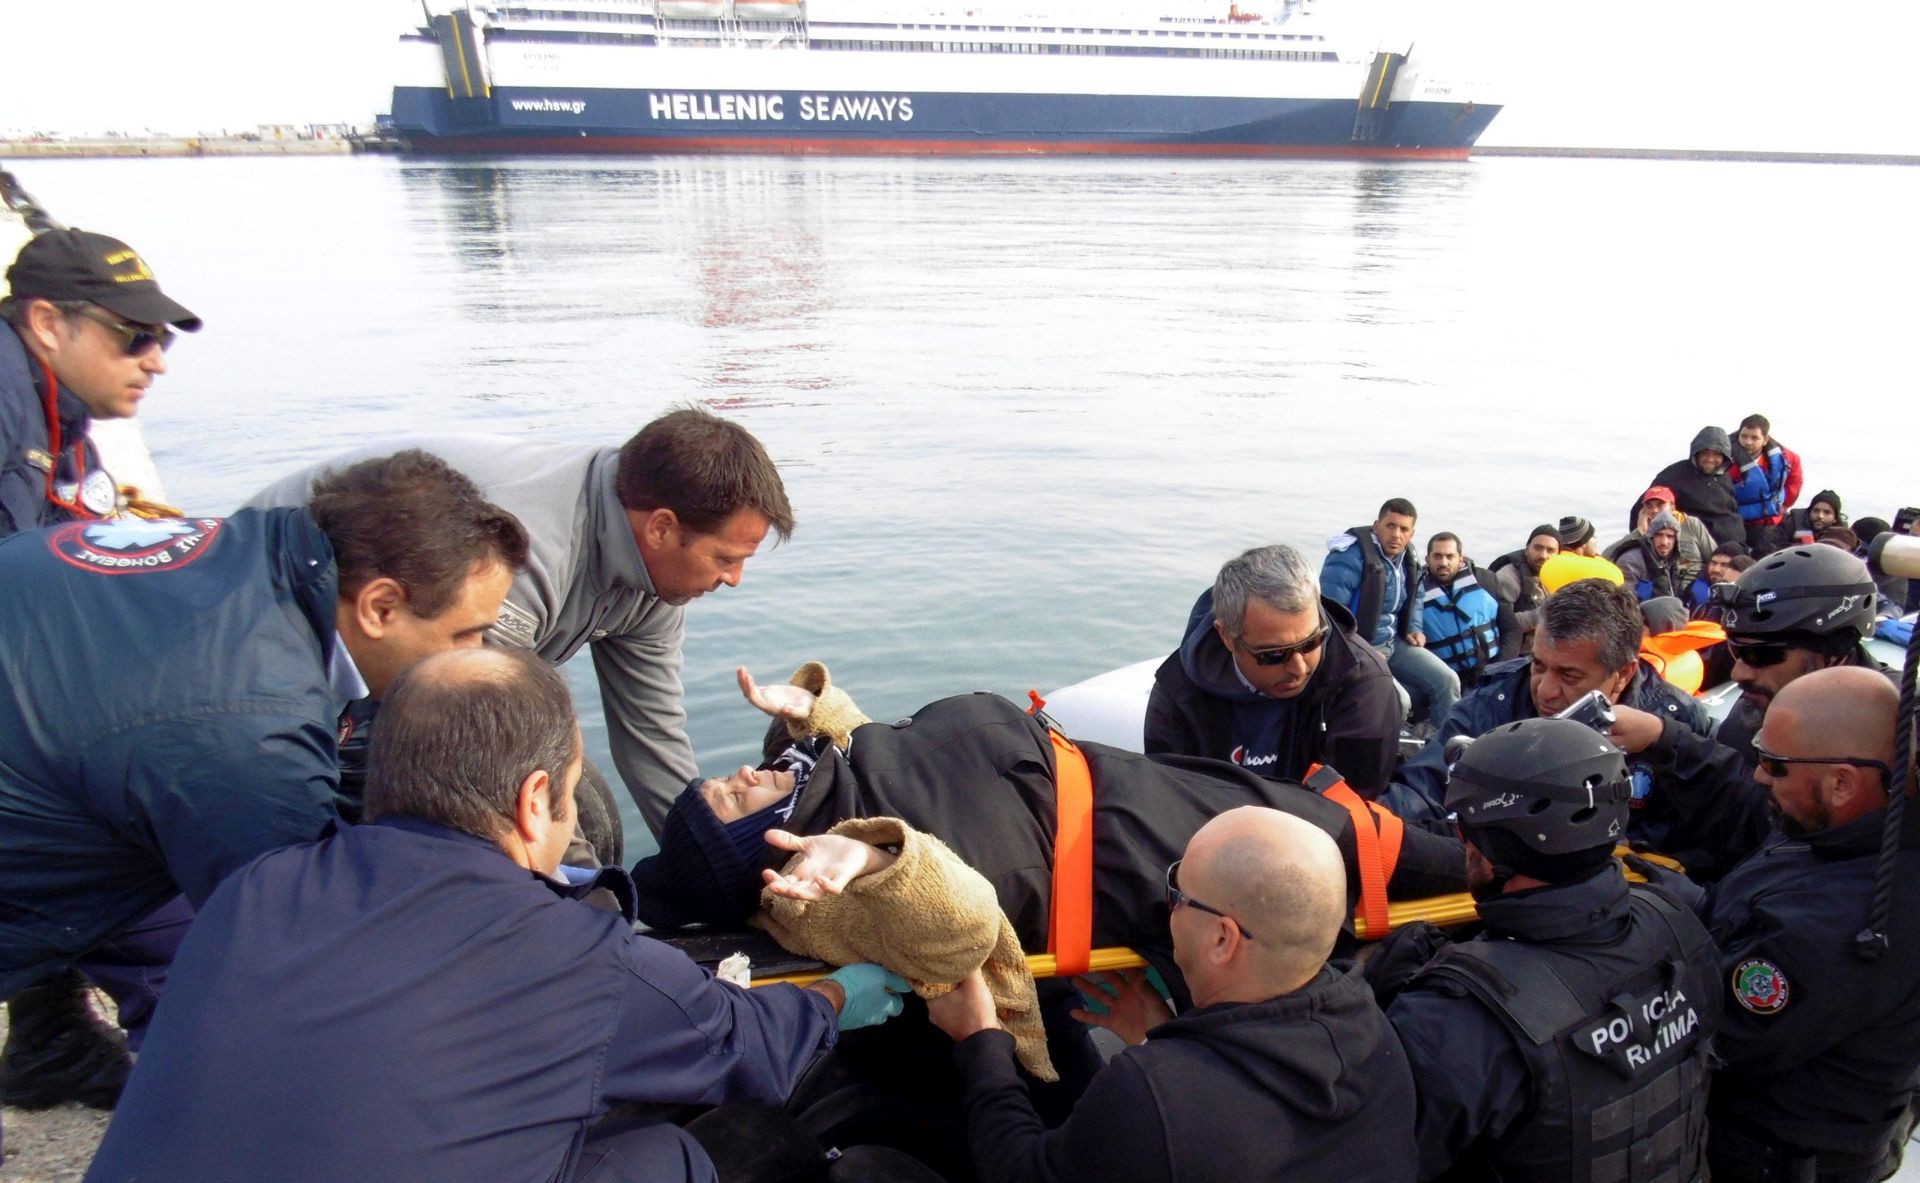 epa05070199 Coast guards and volunteers carry a woman form an overloaded rubber dinghy with refugees and migrants, following a successful rescue operation on the Greek island of Lesbos (Lesvos), Greece, 15 December 2015, after crossing the Aegean Sea from Turkey. Around 800,000 migrants and refugees are estimated to have arrived in Greece since the beginning of the year, with most moving on - sometimes unhindered - to wealthy northern European countries.  EPA/STRINGER